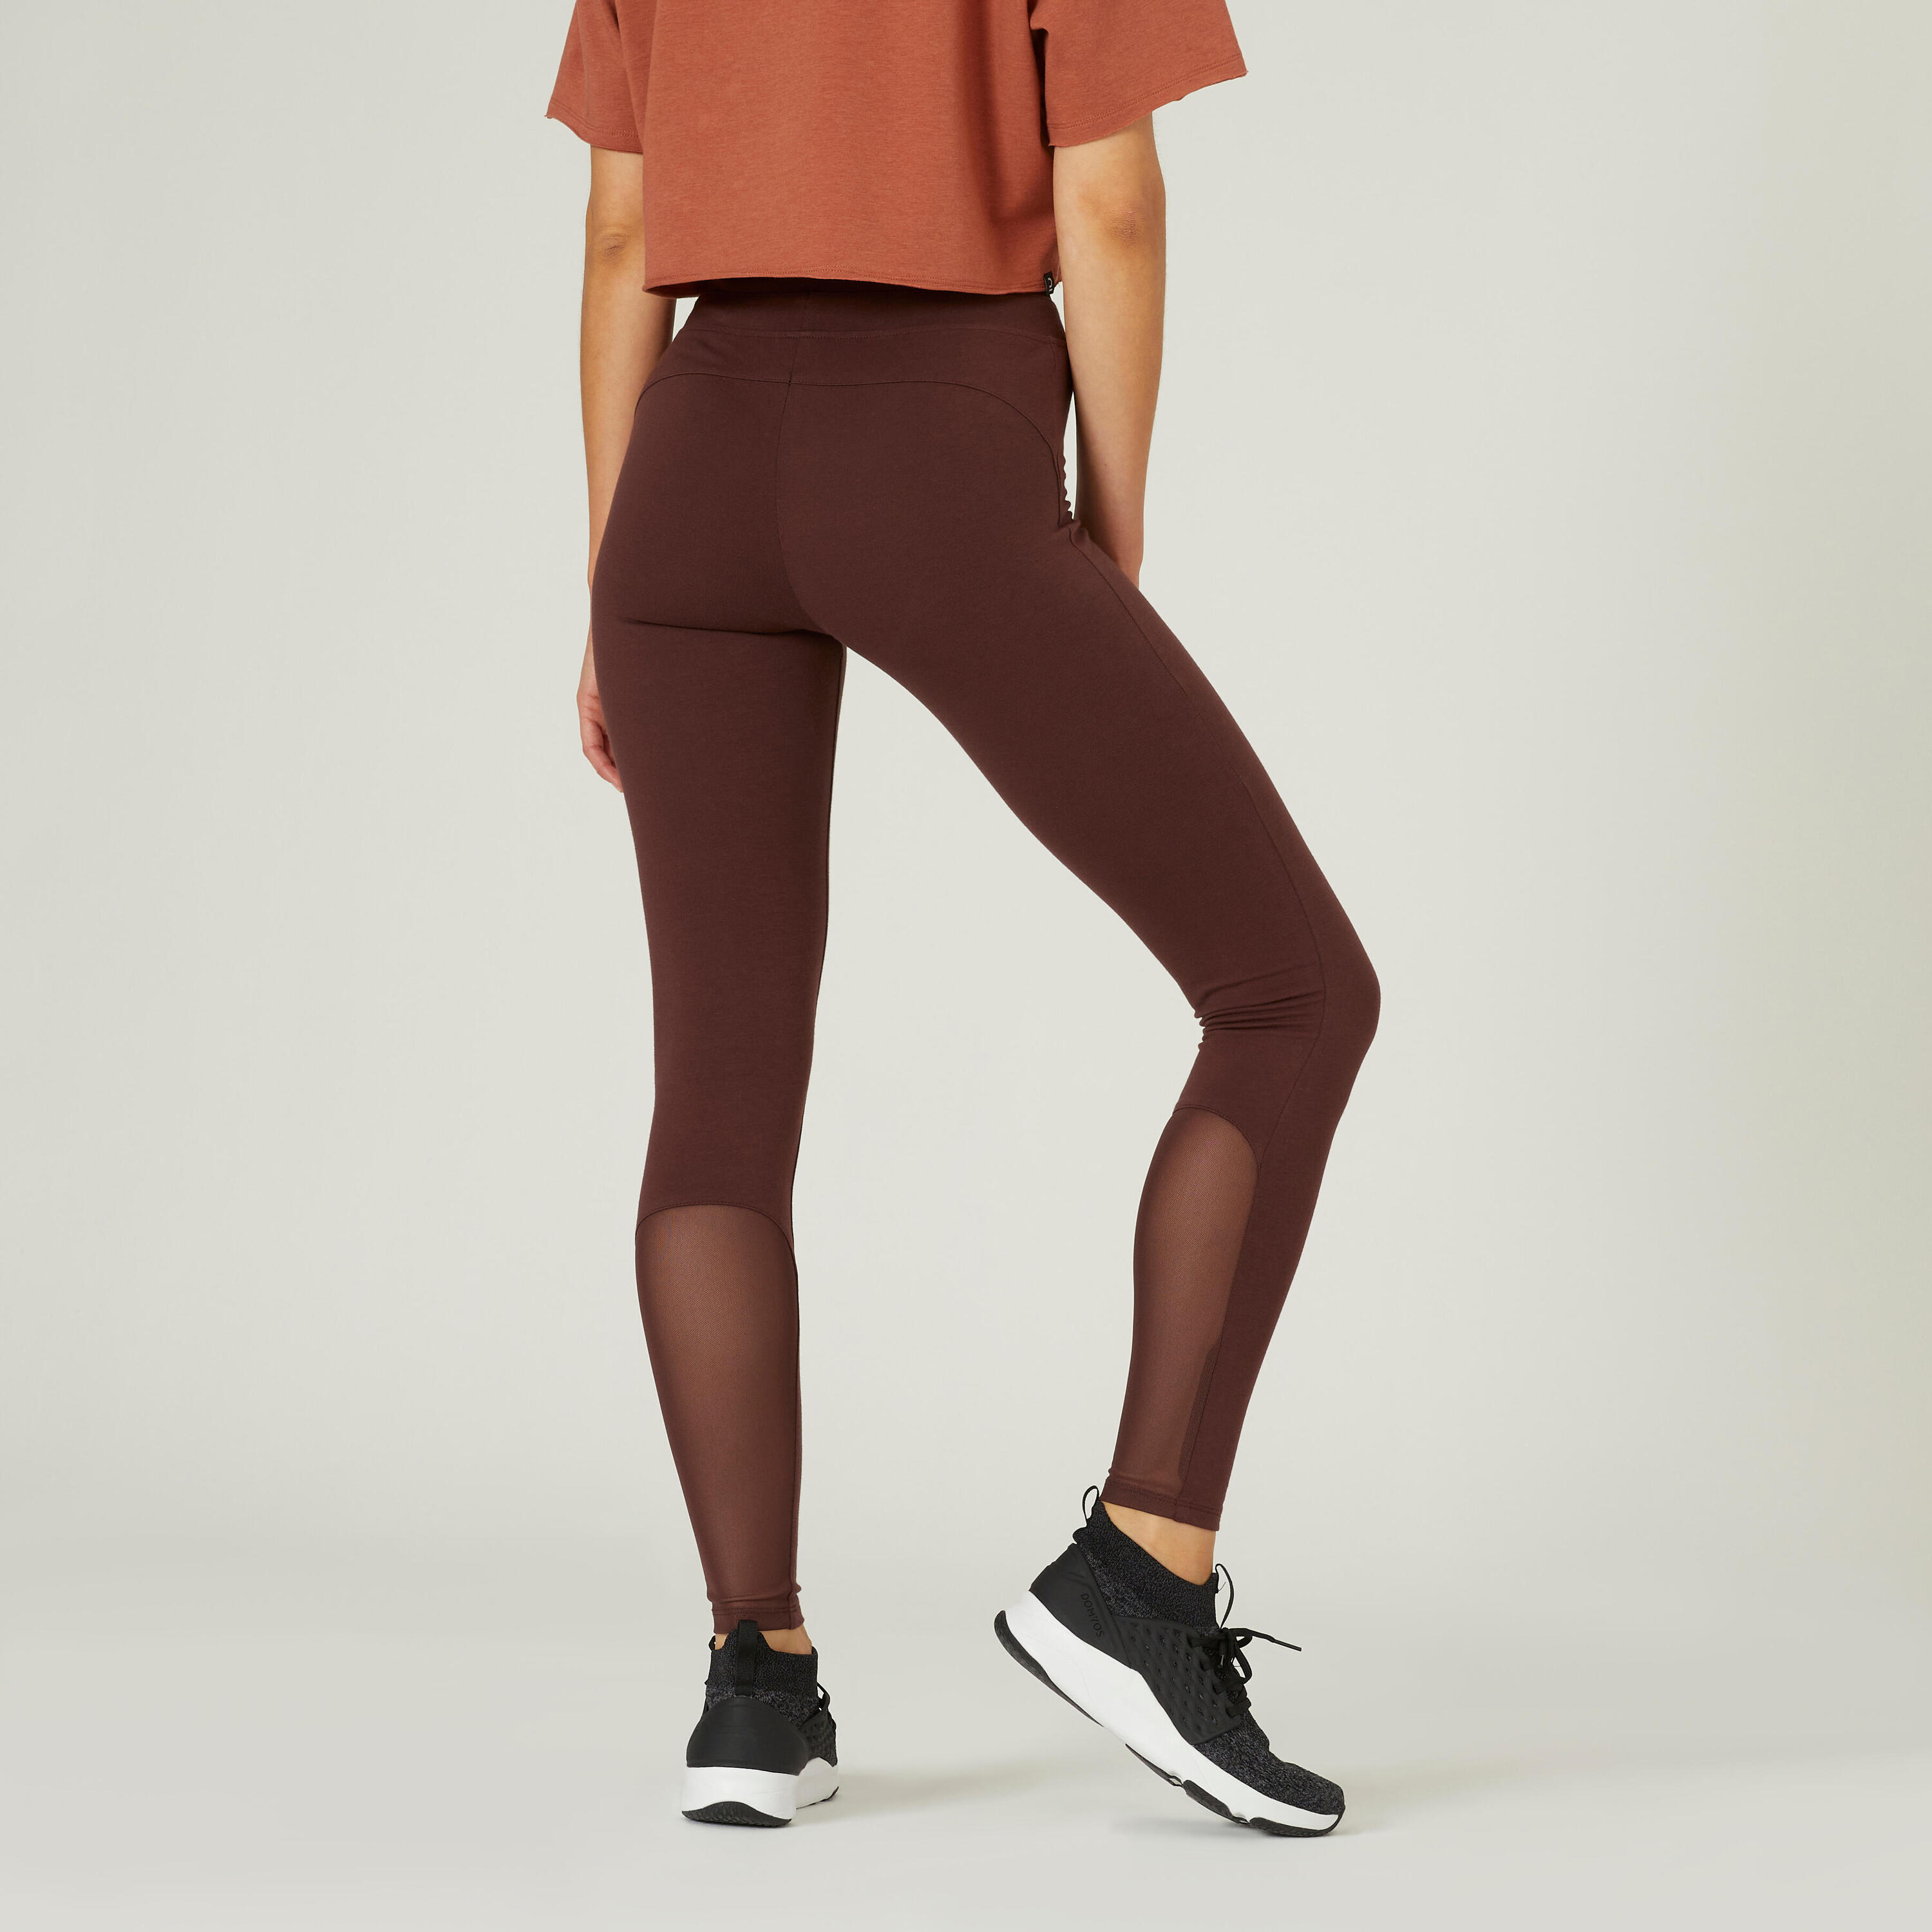 Stretchy High-Waisted Cotton Fitness Leggings with Mesh - Brown 2/7